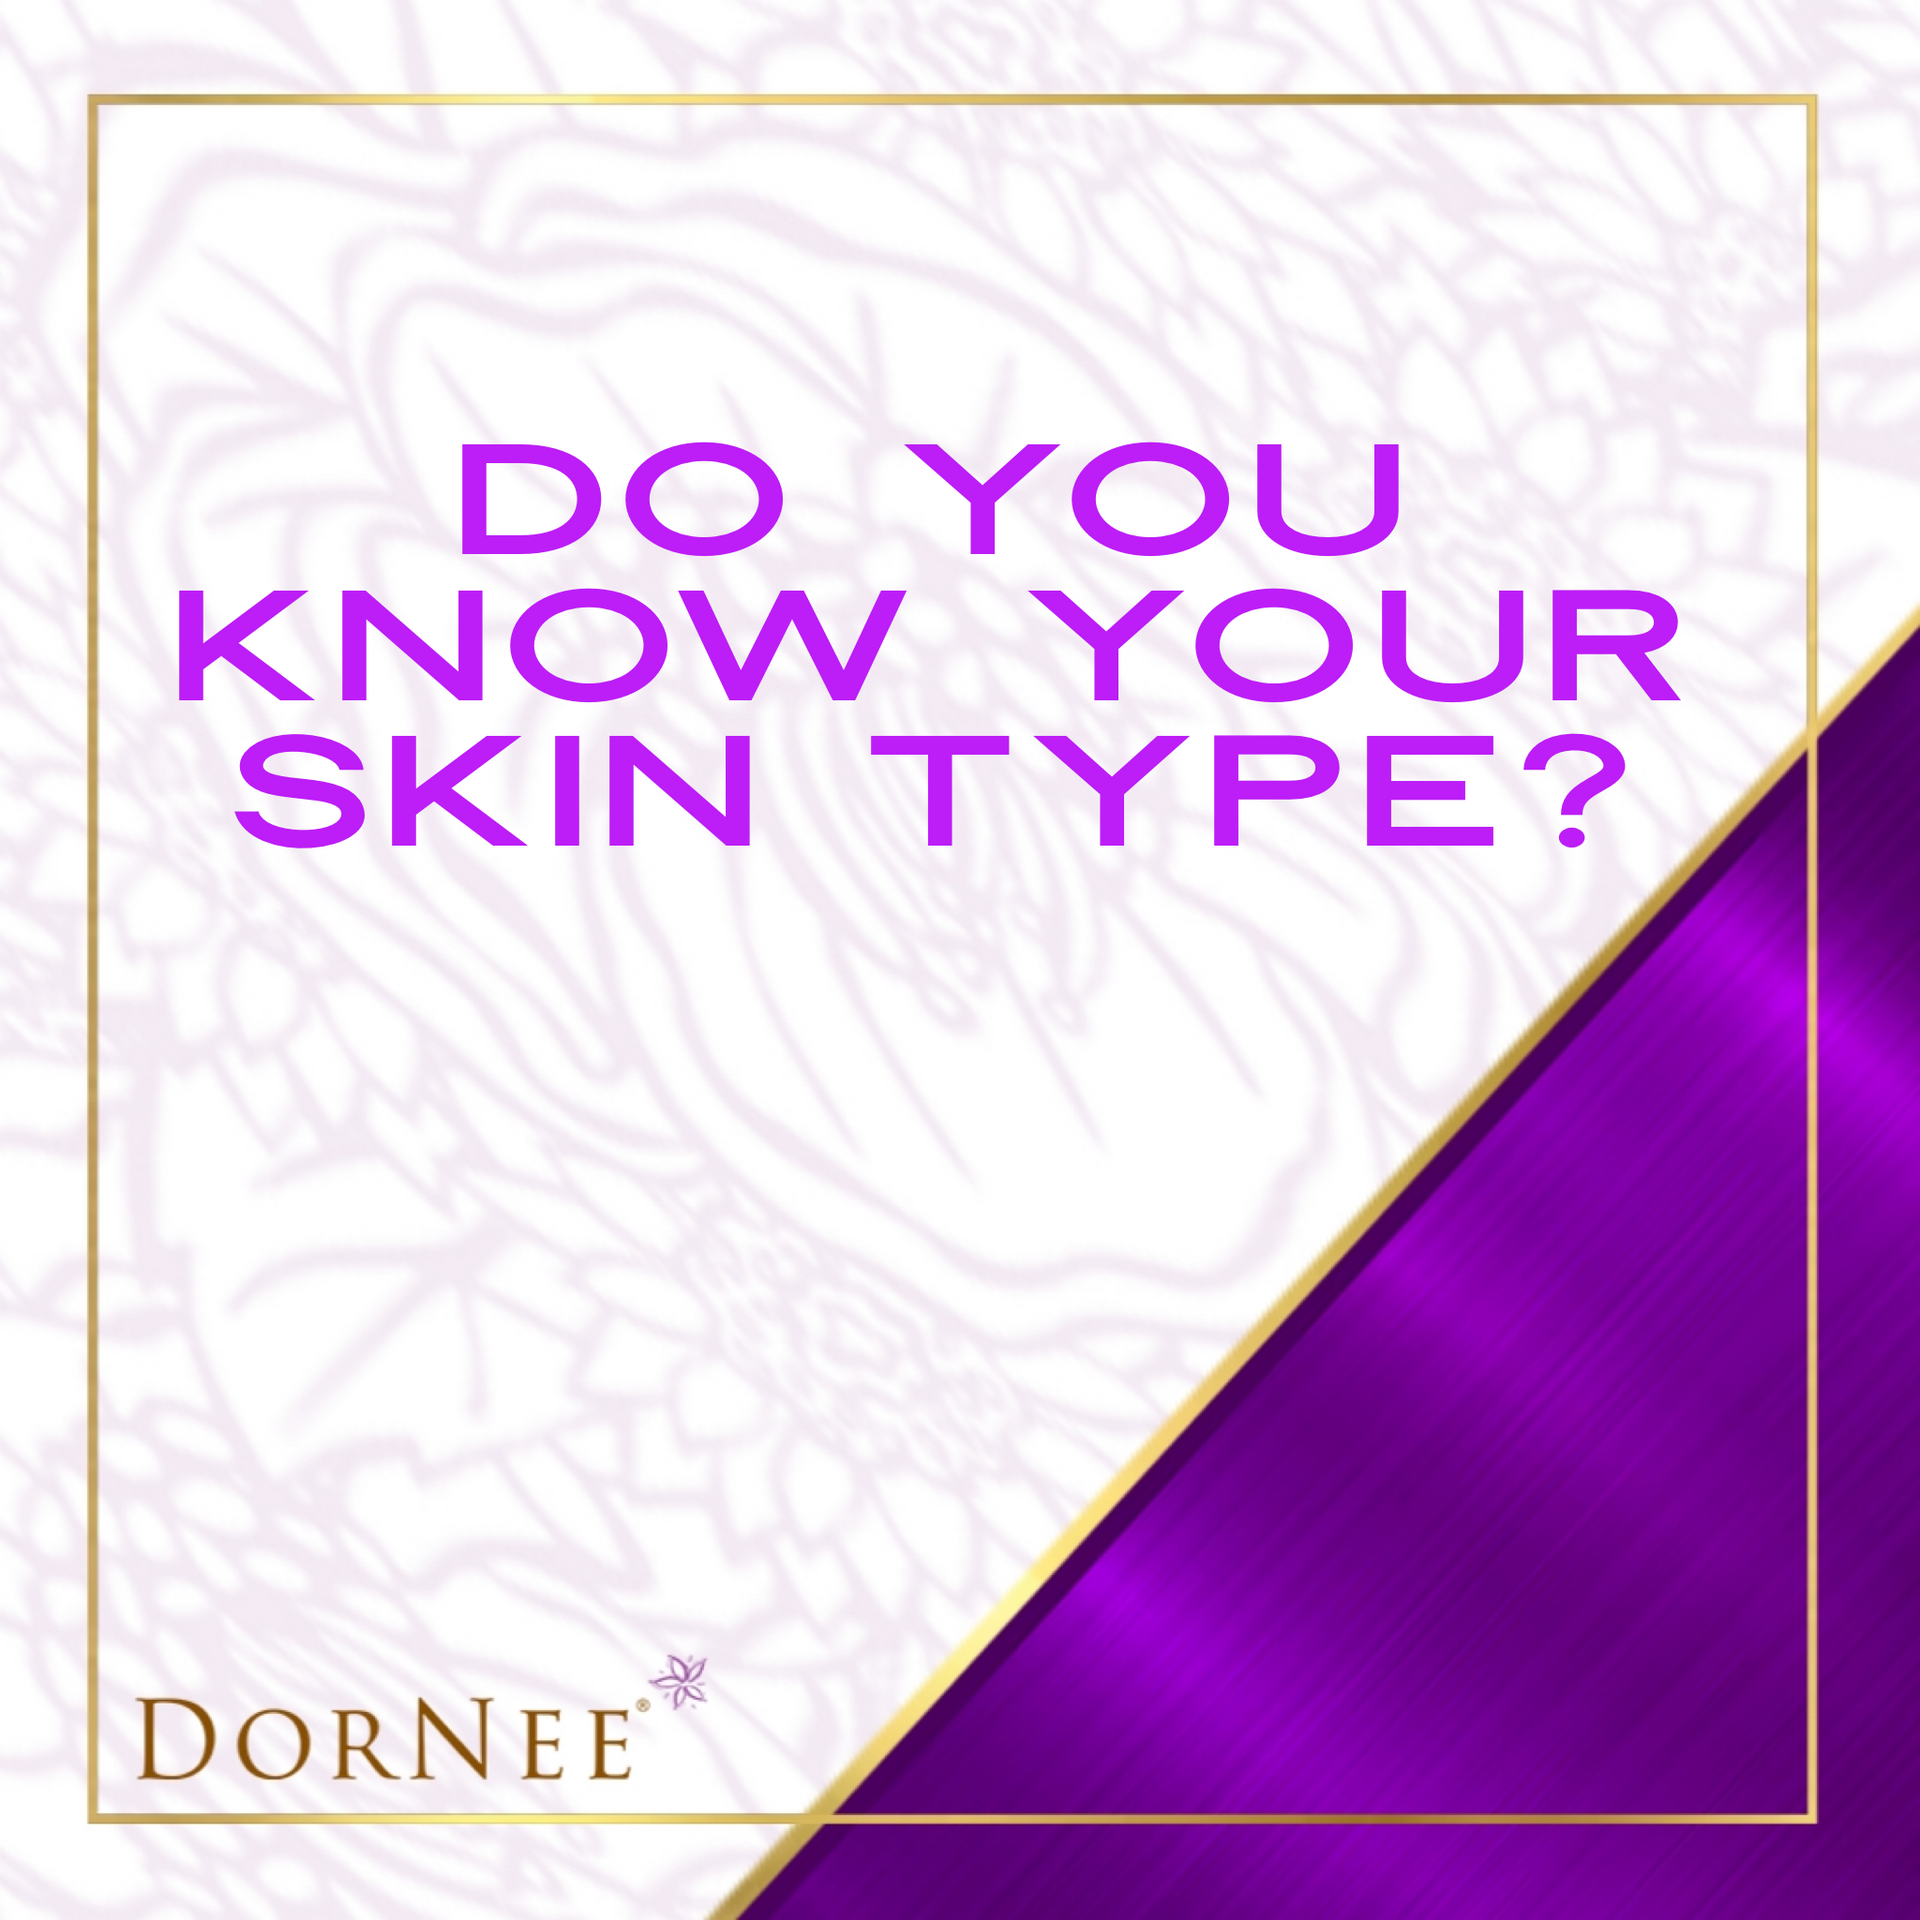 Do You Know Your Skin Type?